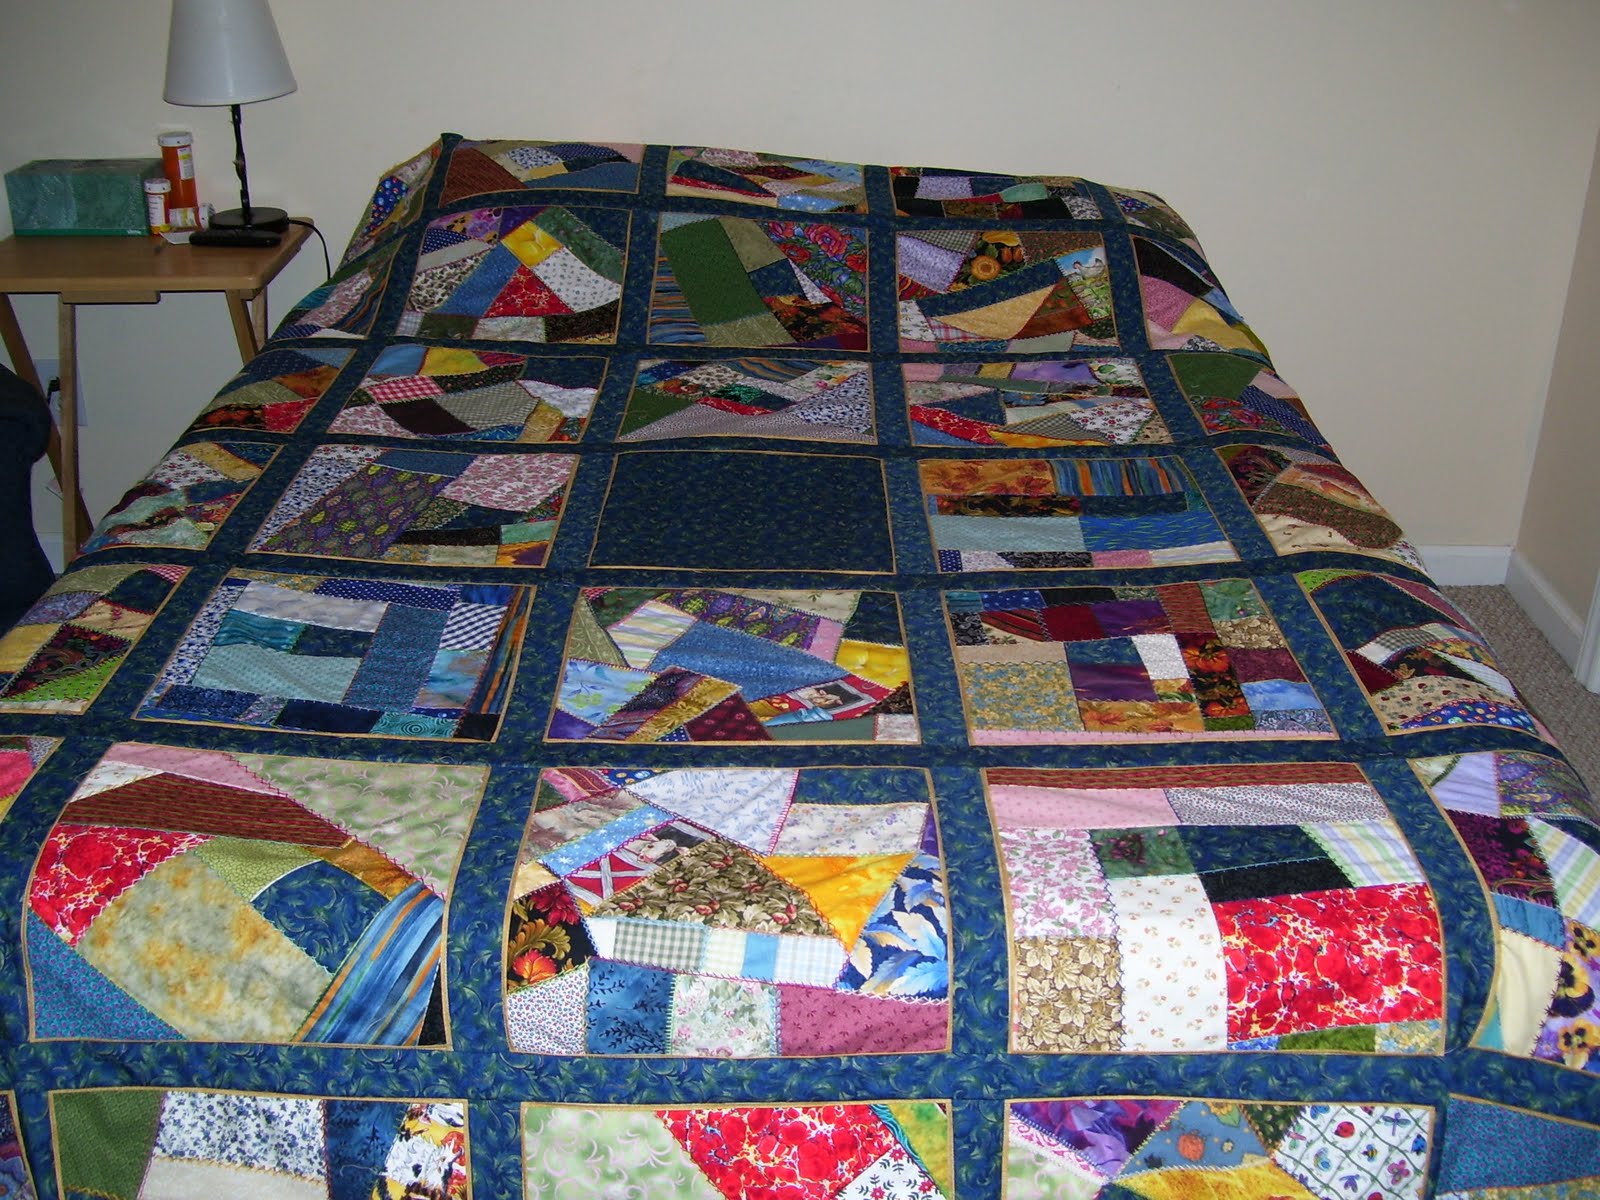 Sally's Burrow: Foundation Paper Piecing & Crazy Quilting